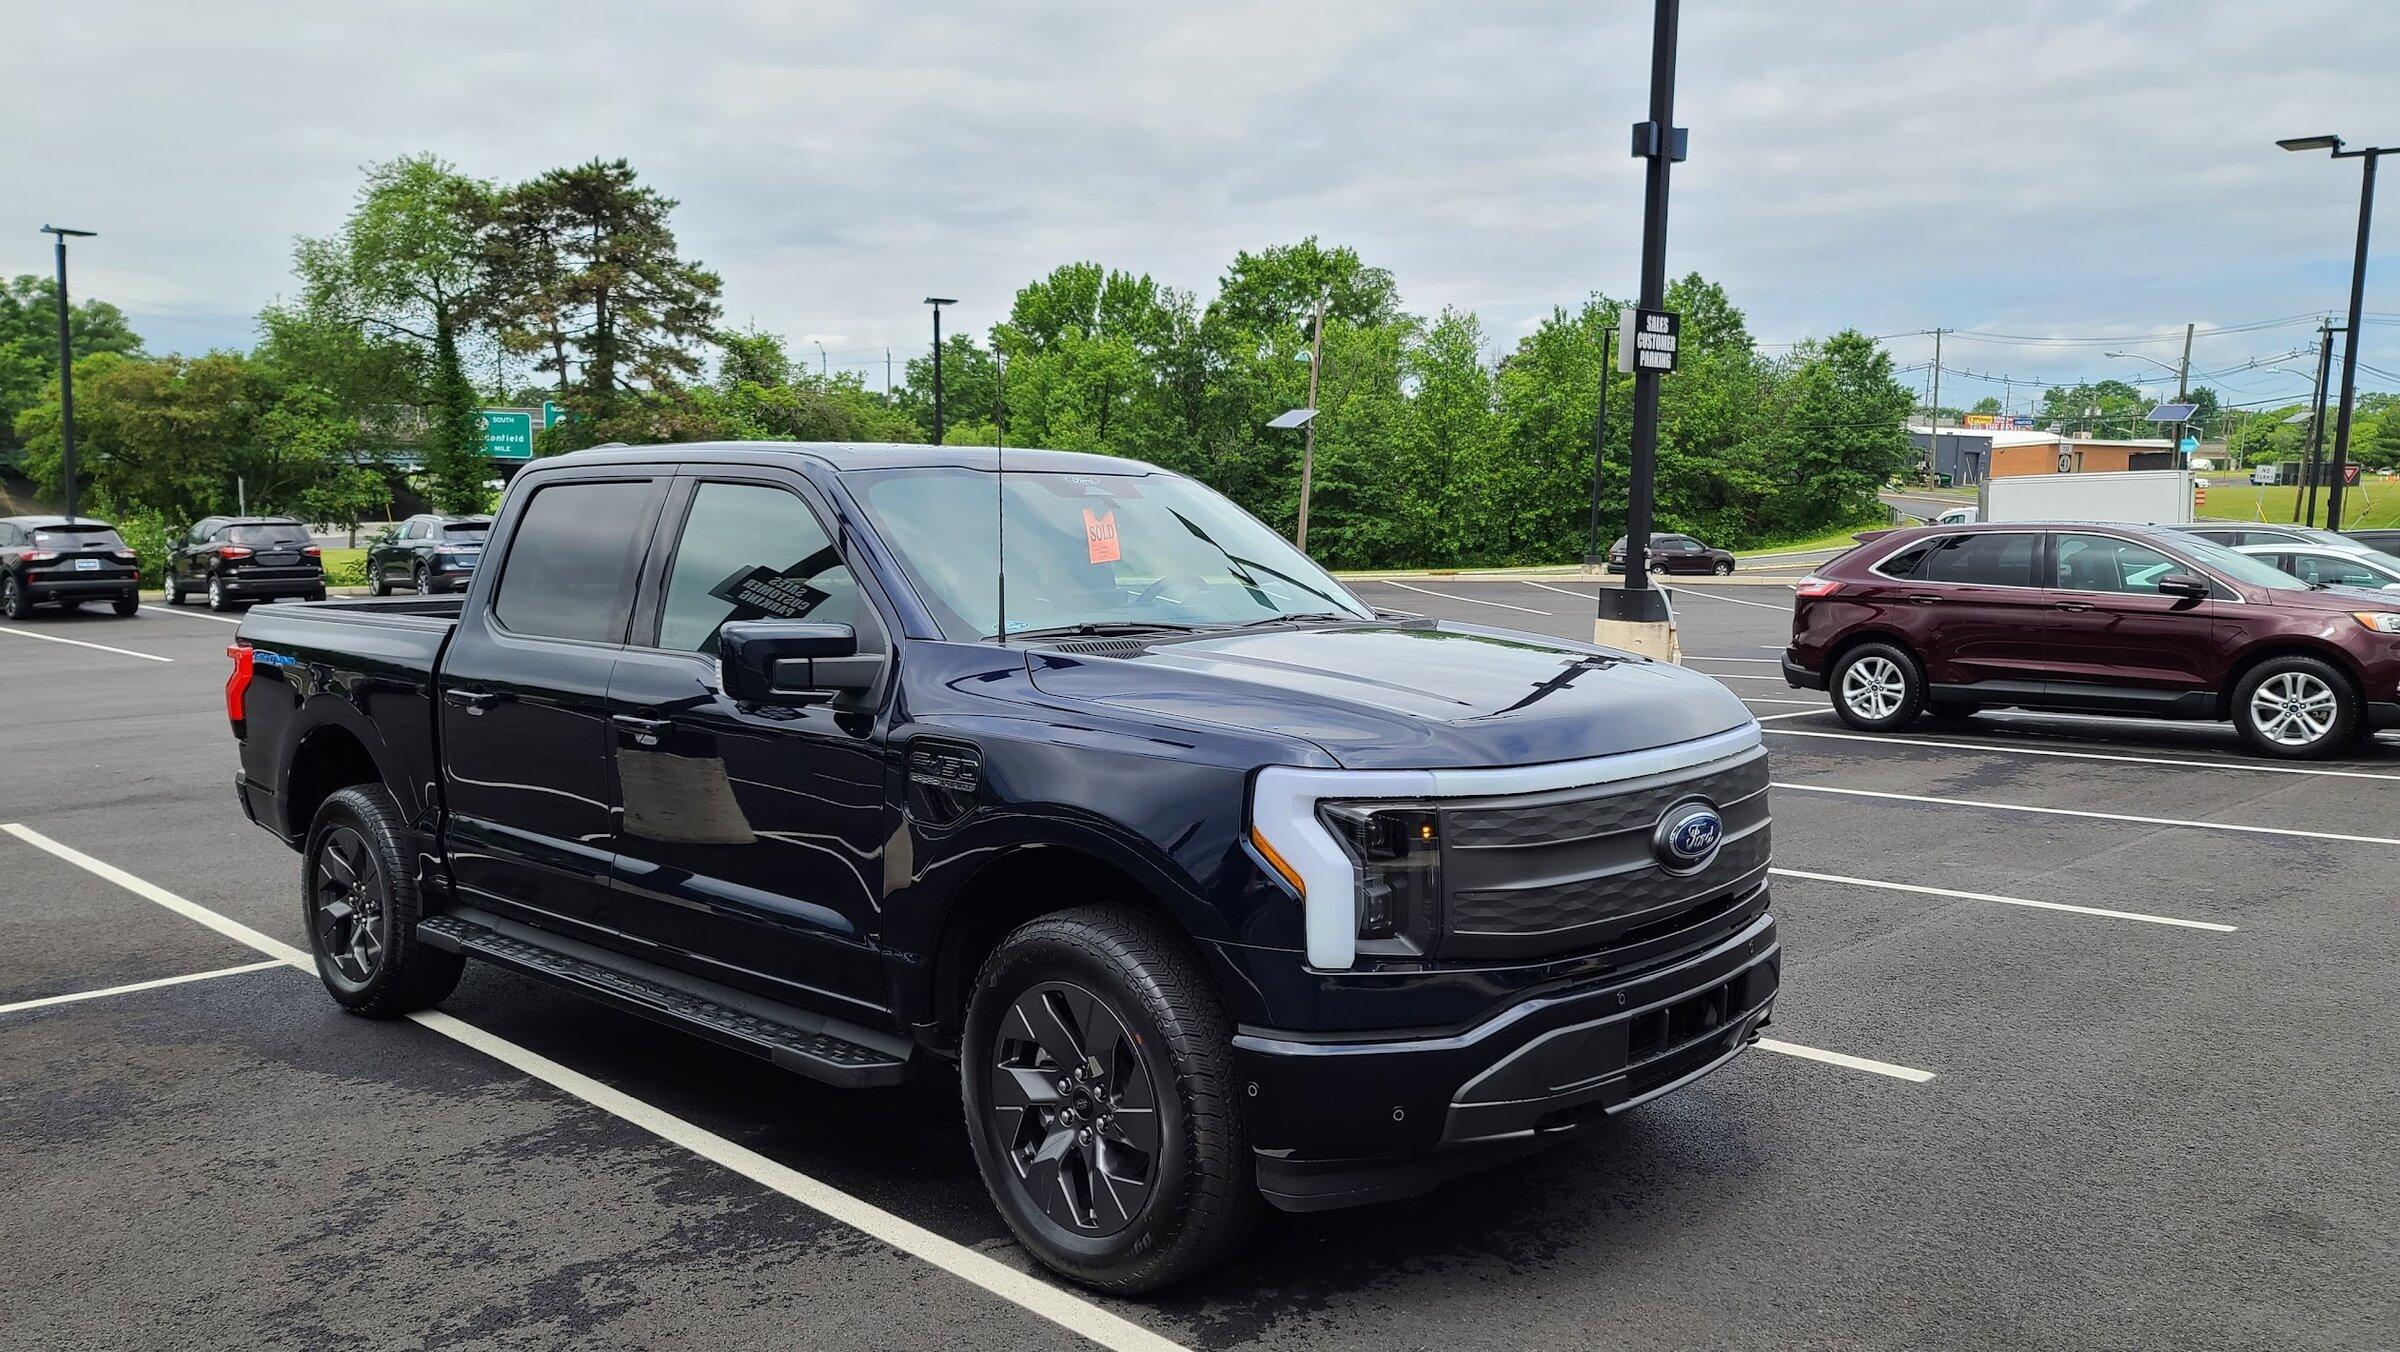 Ford F-150 Lightning Lightning Delivered (maybe first in NJ) - Updated With AMB Photos Galore 20220603_105918